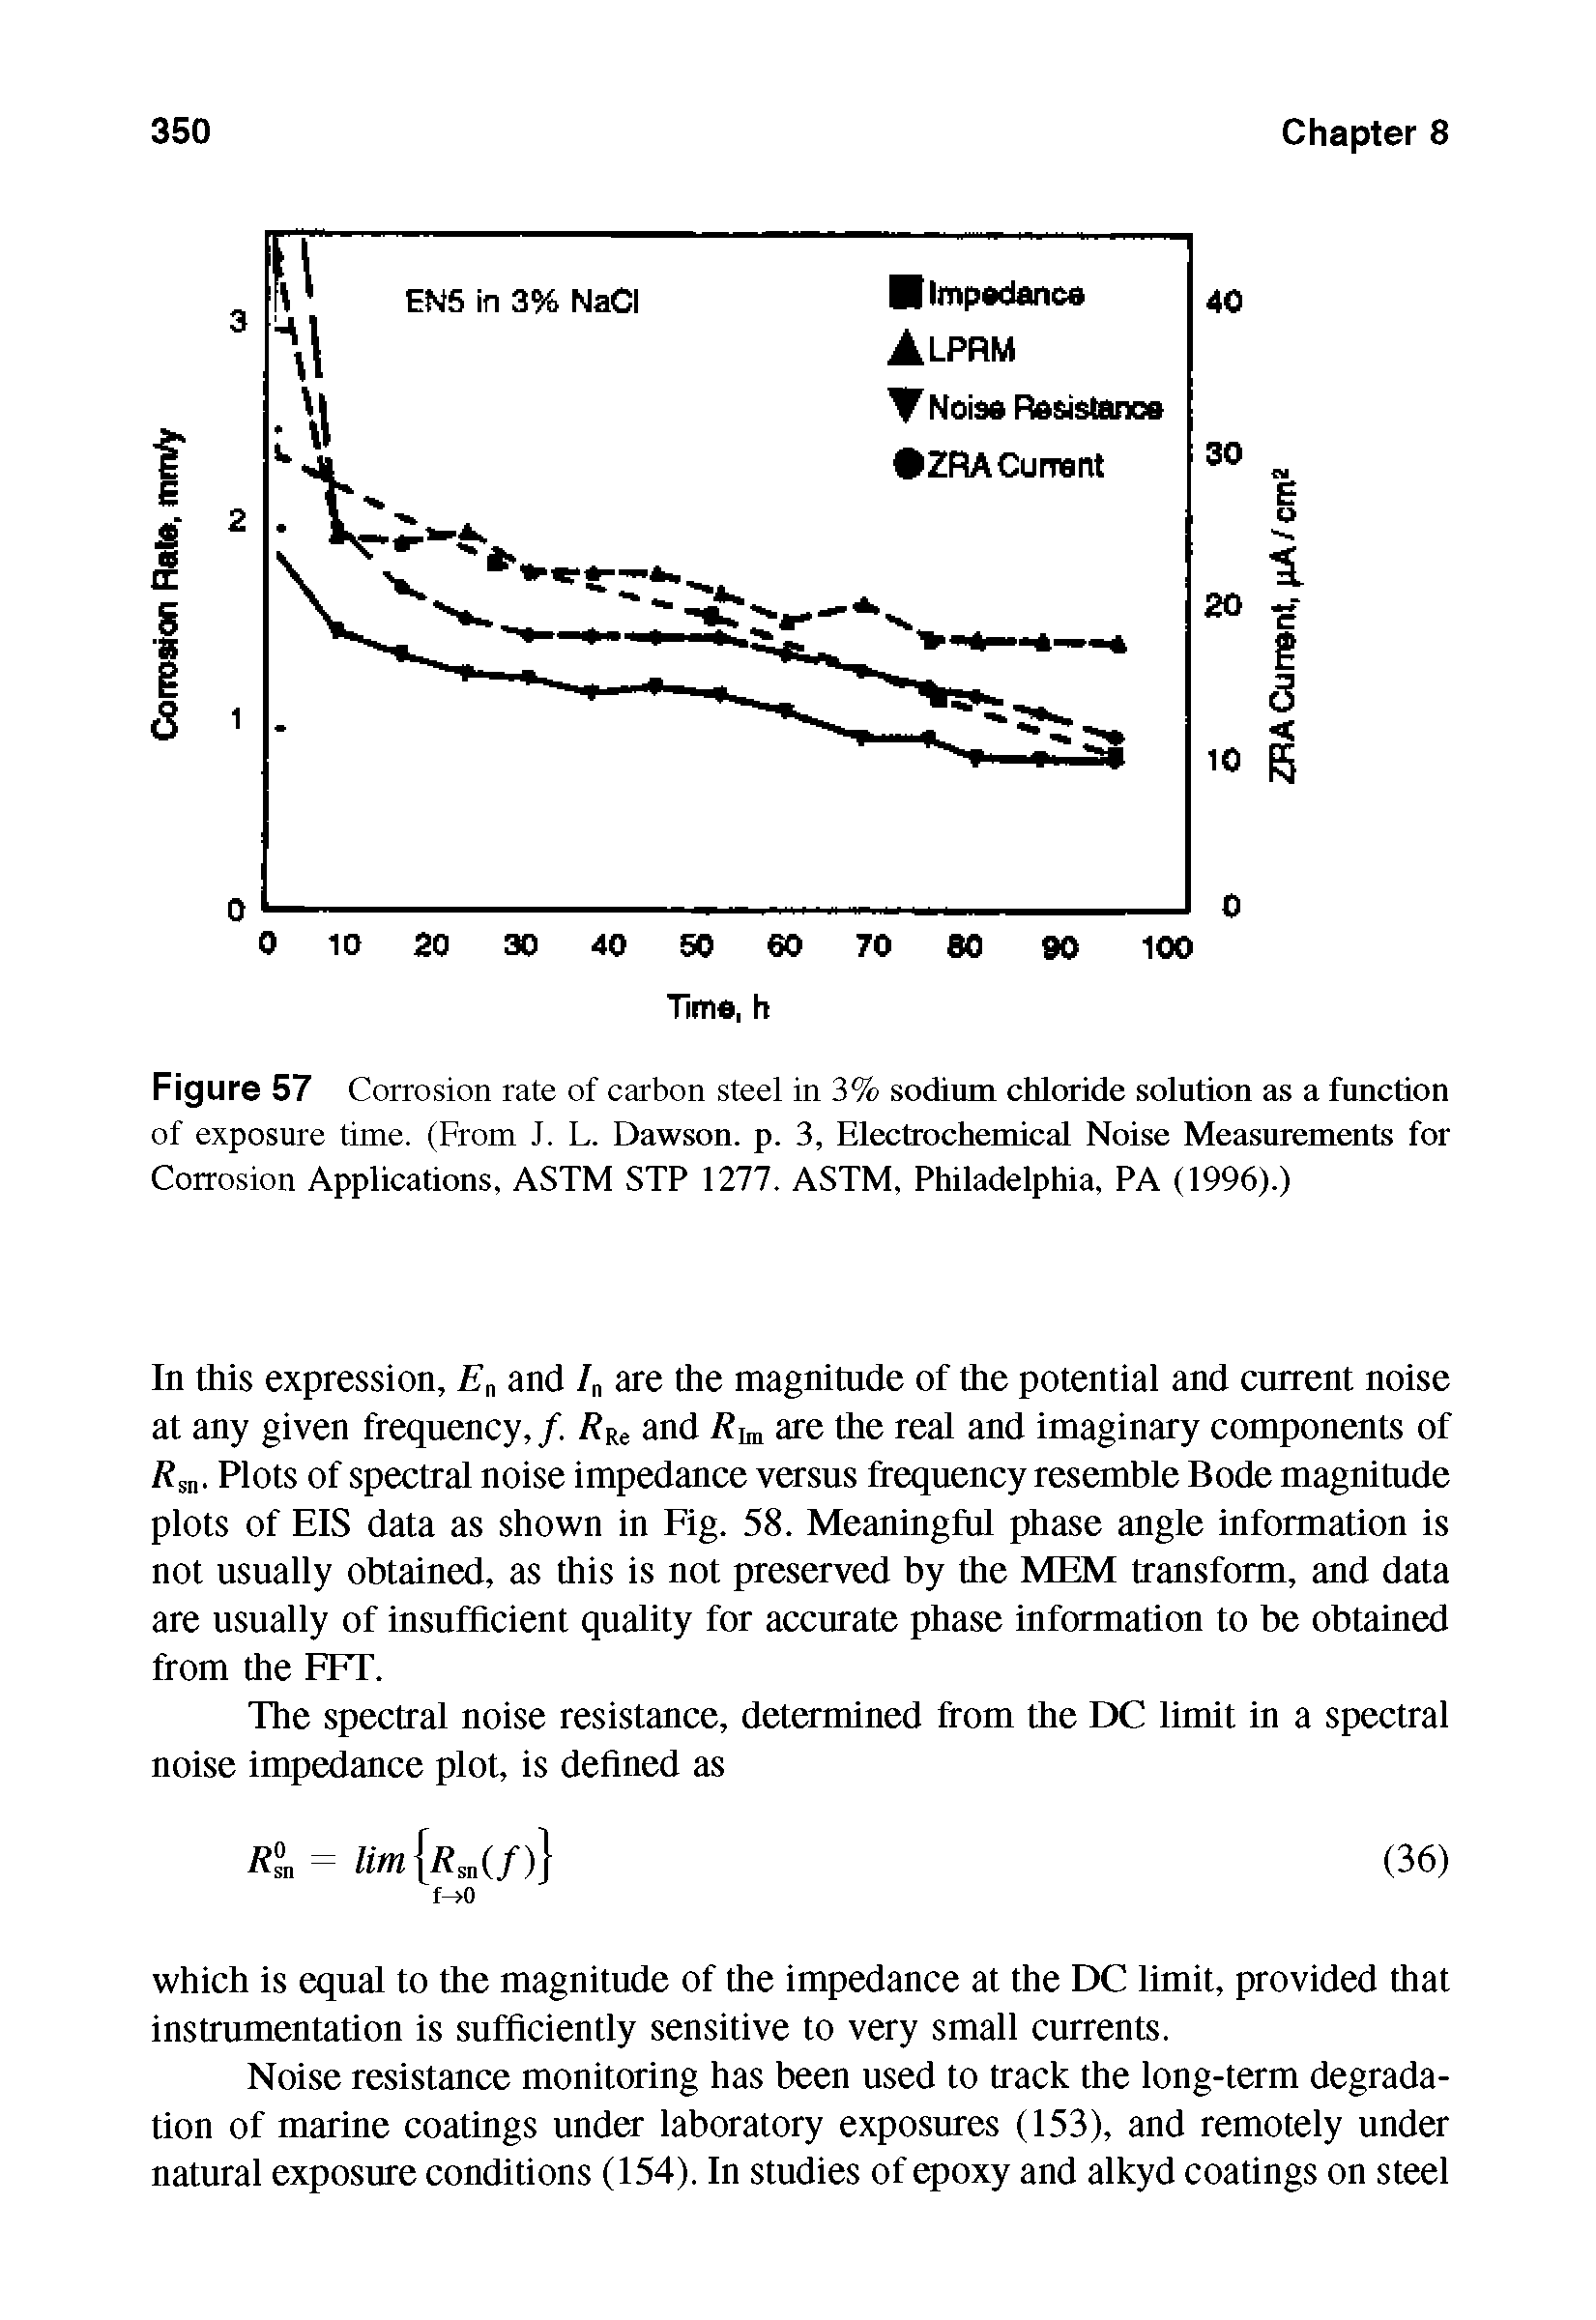 Figure 57 Corrosion rate of carbon steel in 3% sodium chloride solution as a function of exposure time. (From J. L. Dawson, p. 3, Electrochemical Noise Measurements for Corrosion Applications, ASTM STP 1277. ASTM, Philadelphia, PA (1996).)...